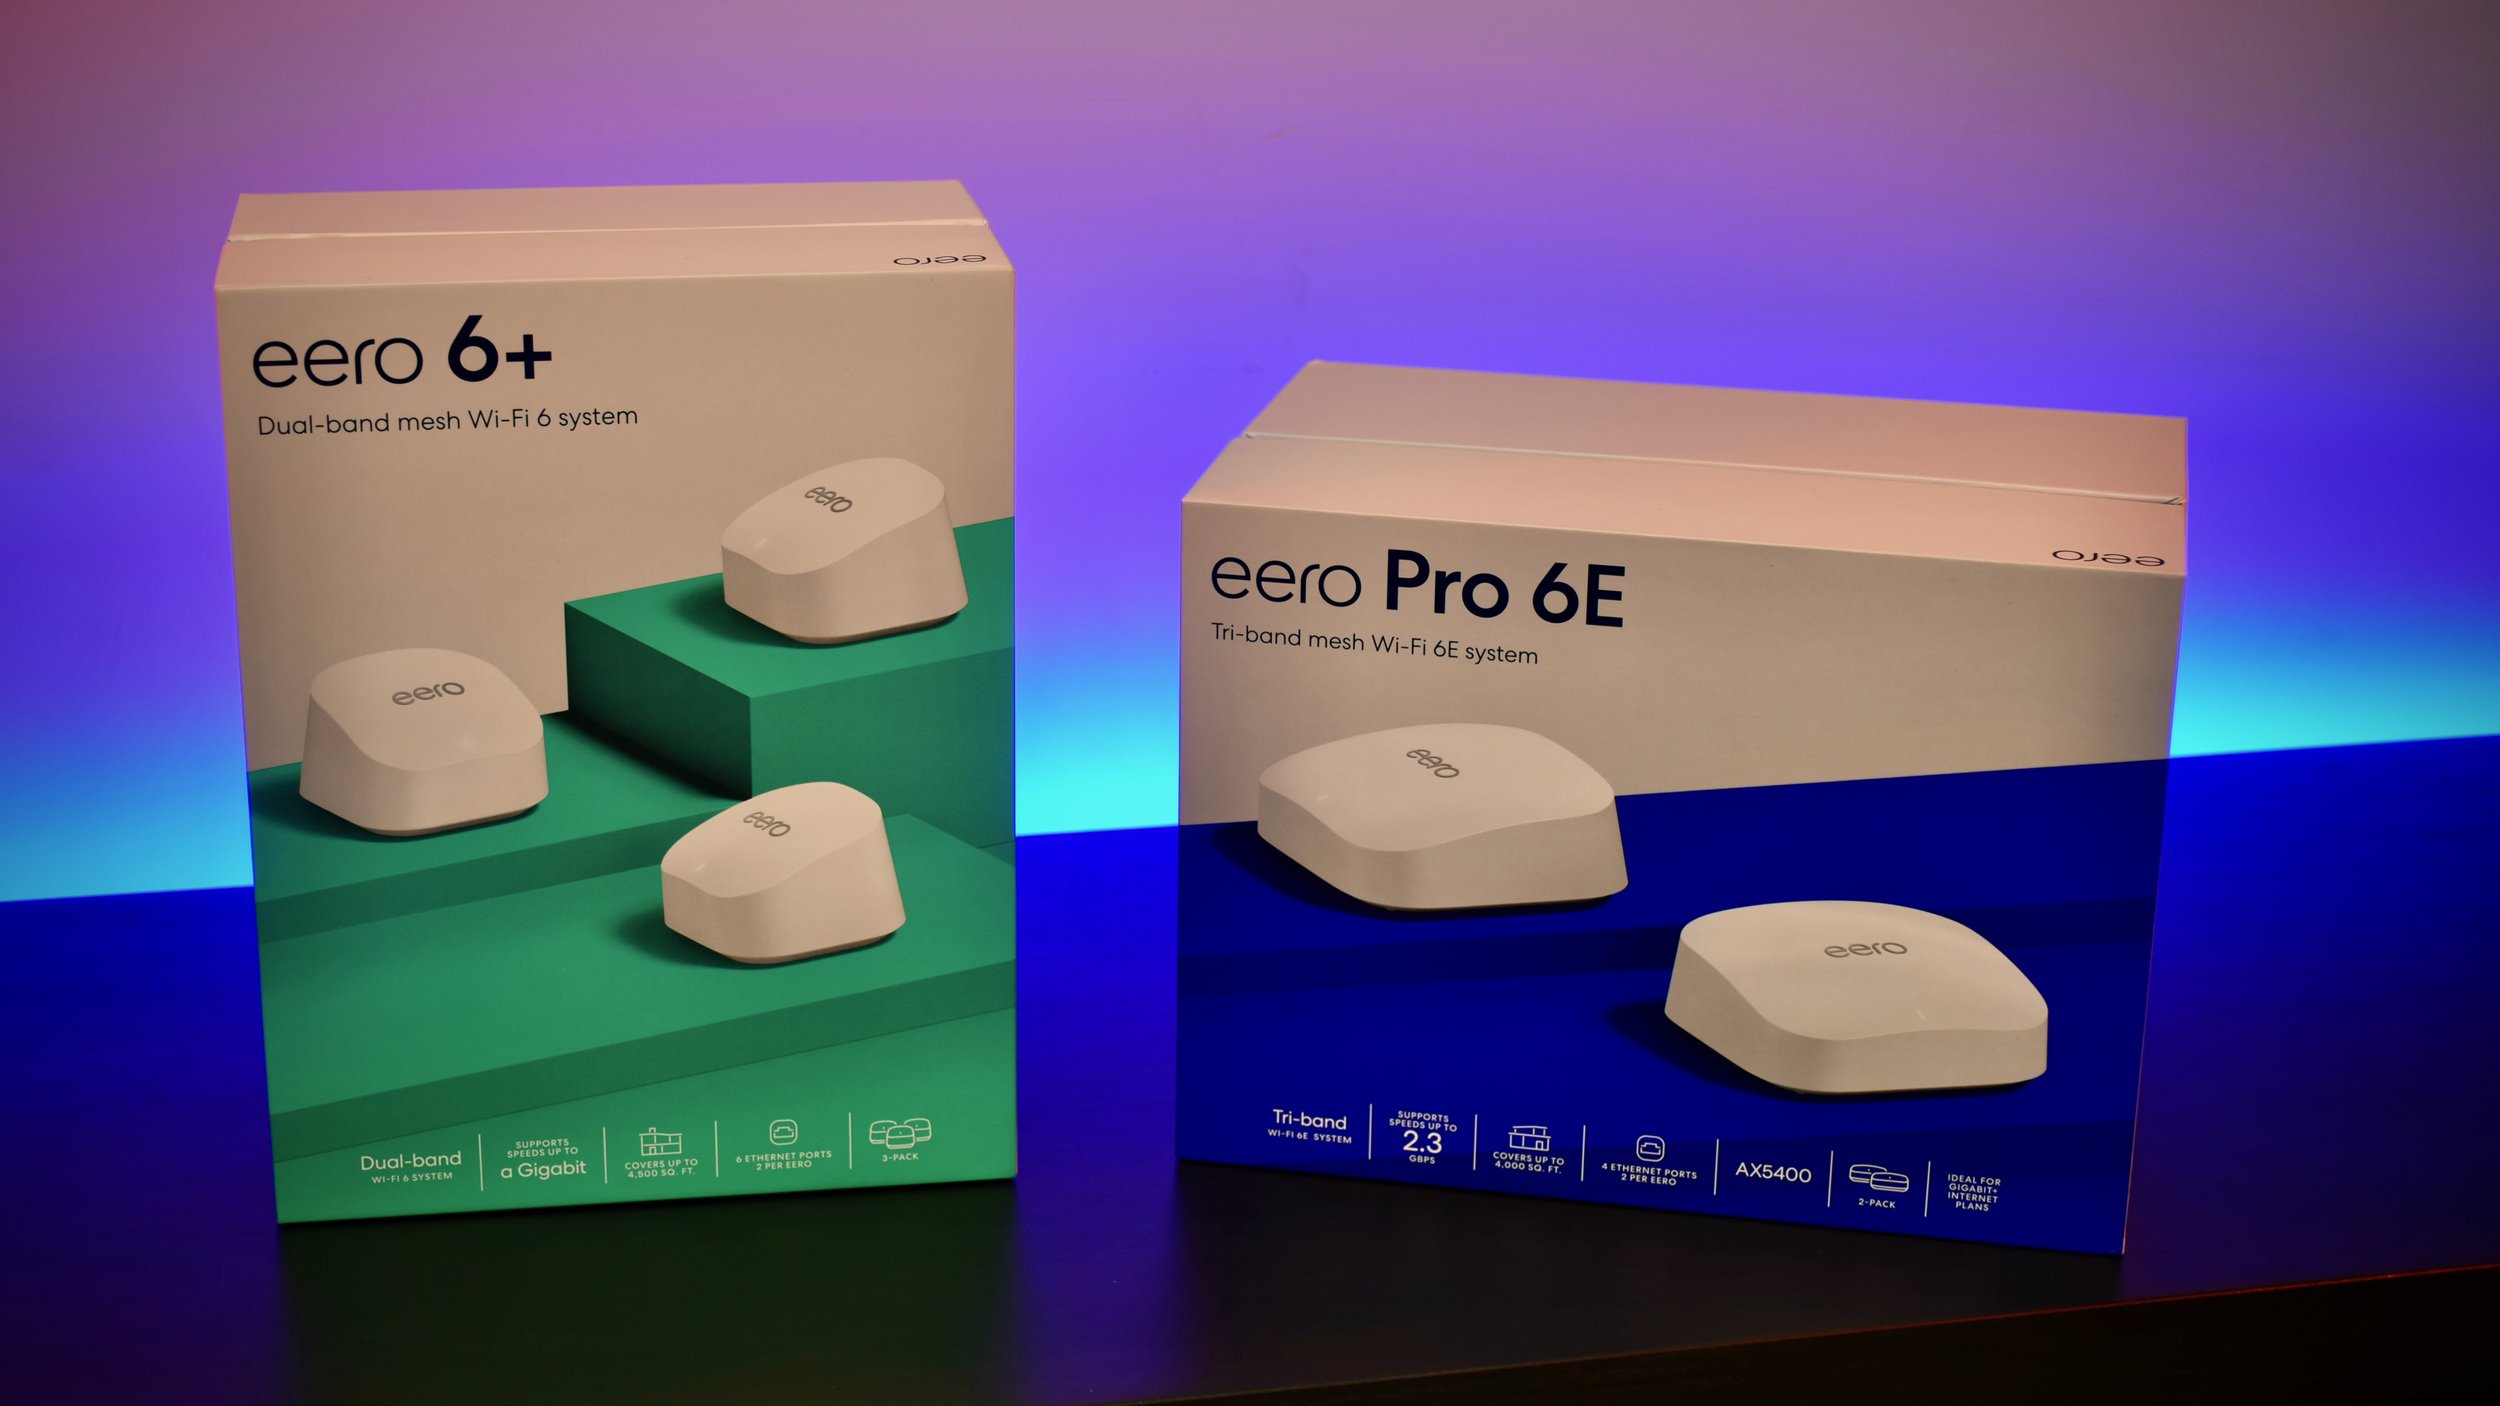 Eero Pro 6E Mesh Router Review: A Great Pick for Gigabit Internet - CNET